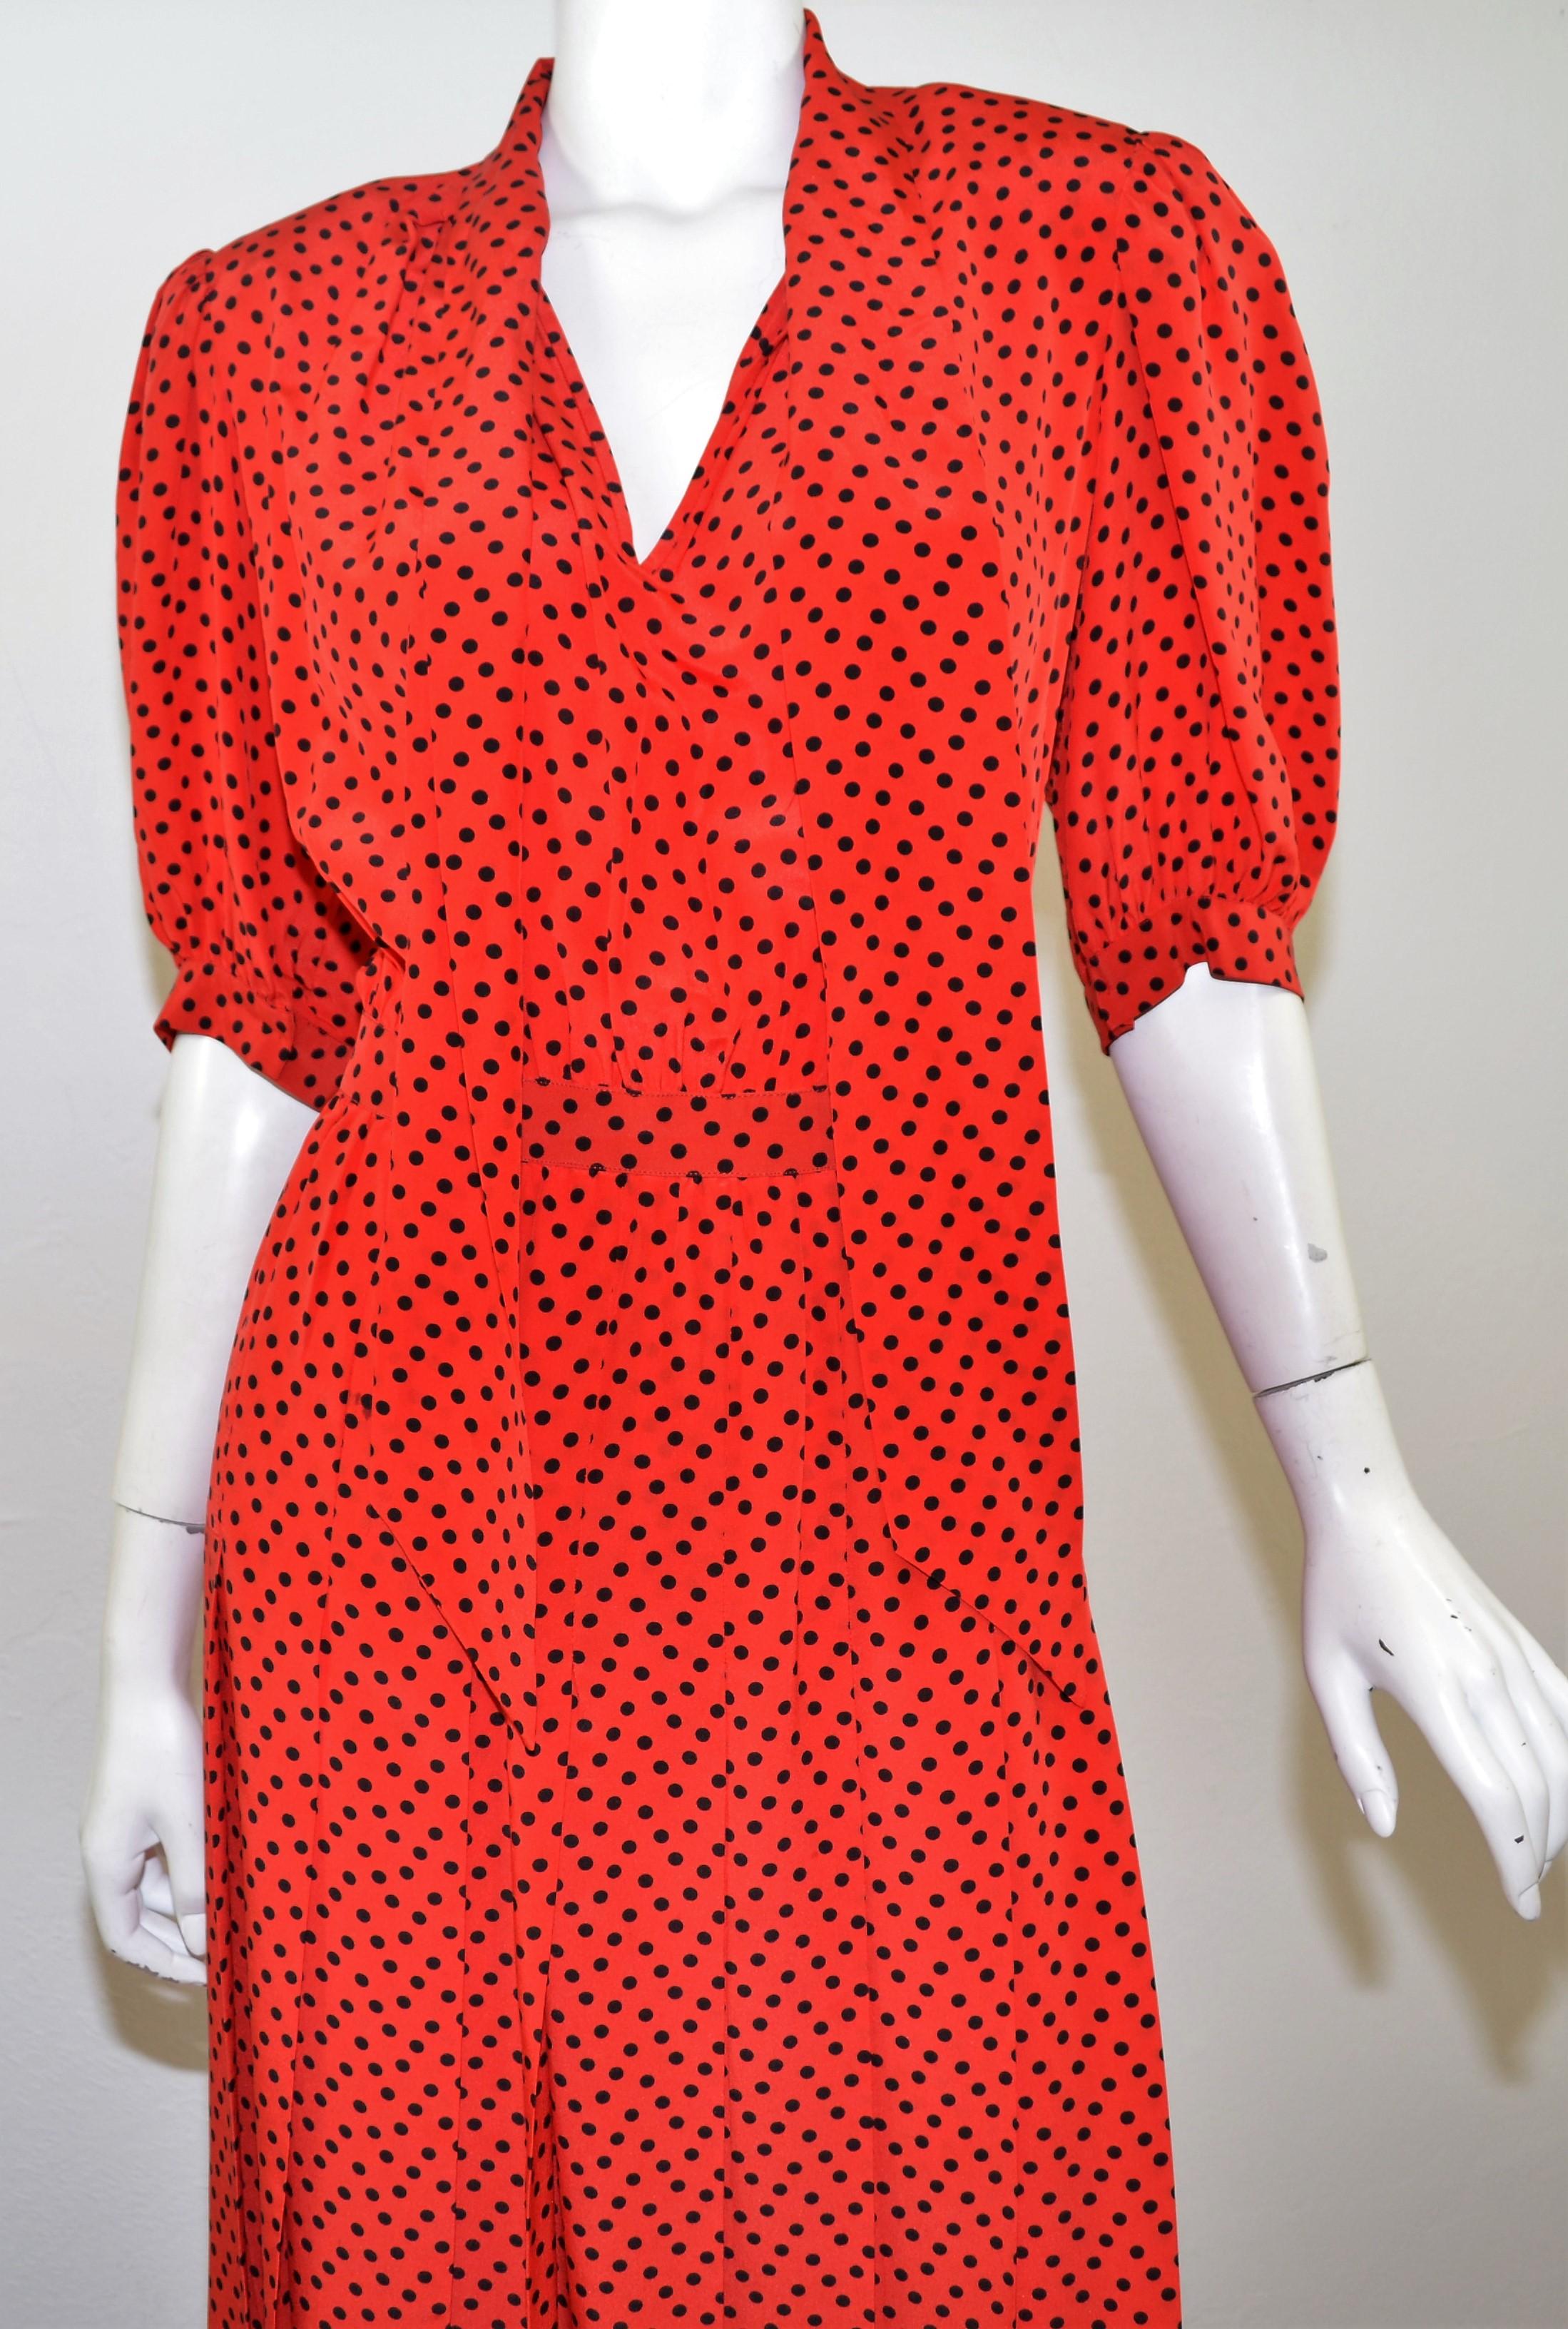 Vintage Saint Laurent dress is featured in red with a black polka-dot print pattern throughout and has a side zipper fastening, neck tie, and a pleated skirt. Made in France, size 42. 

Bust 38''
Waist 30''
Hips 38''
Length 44''
Sleeves